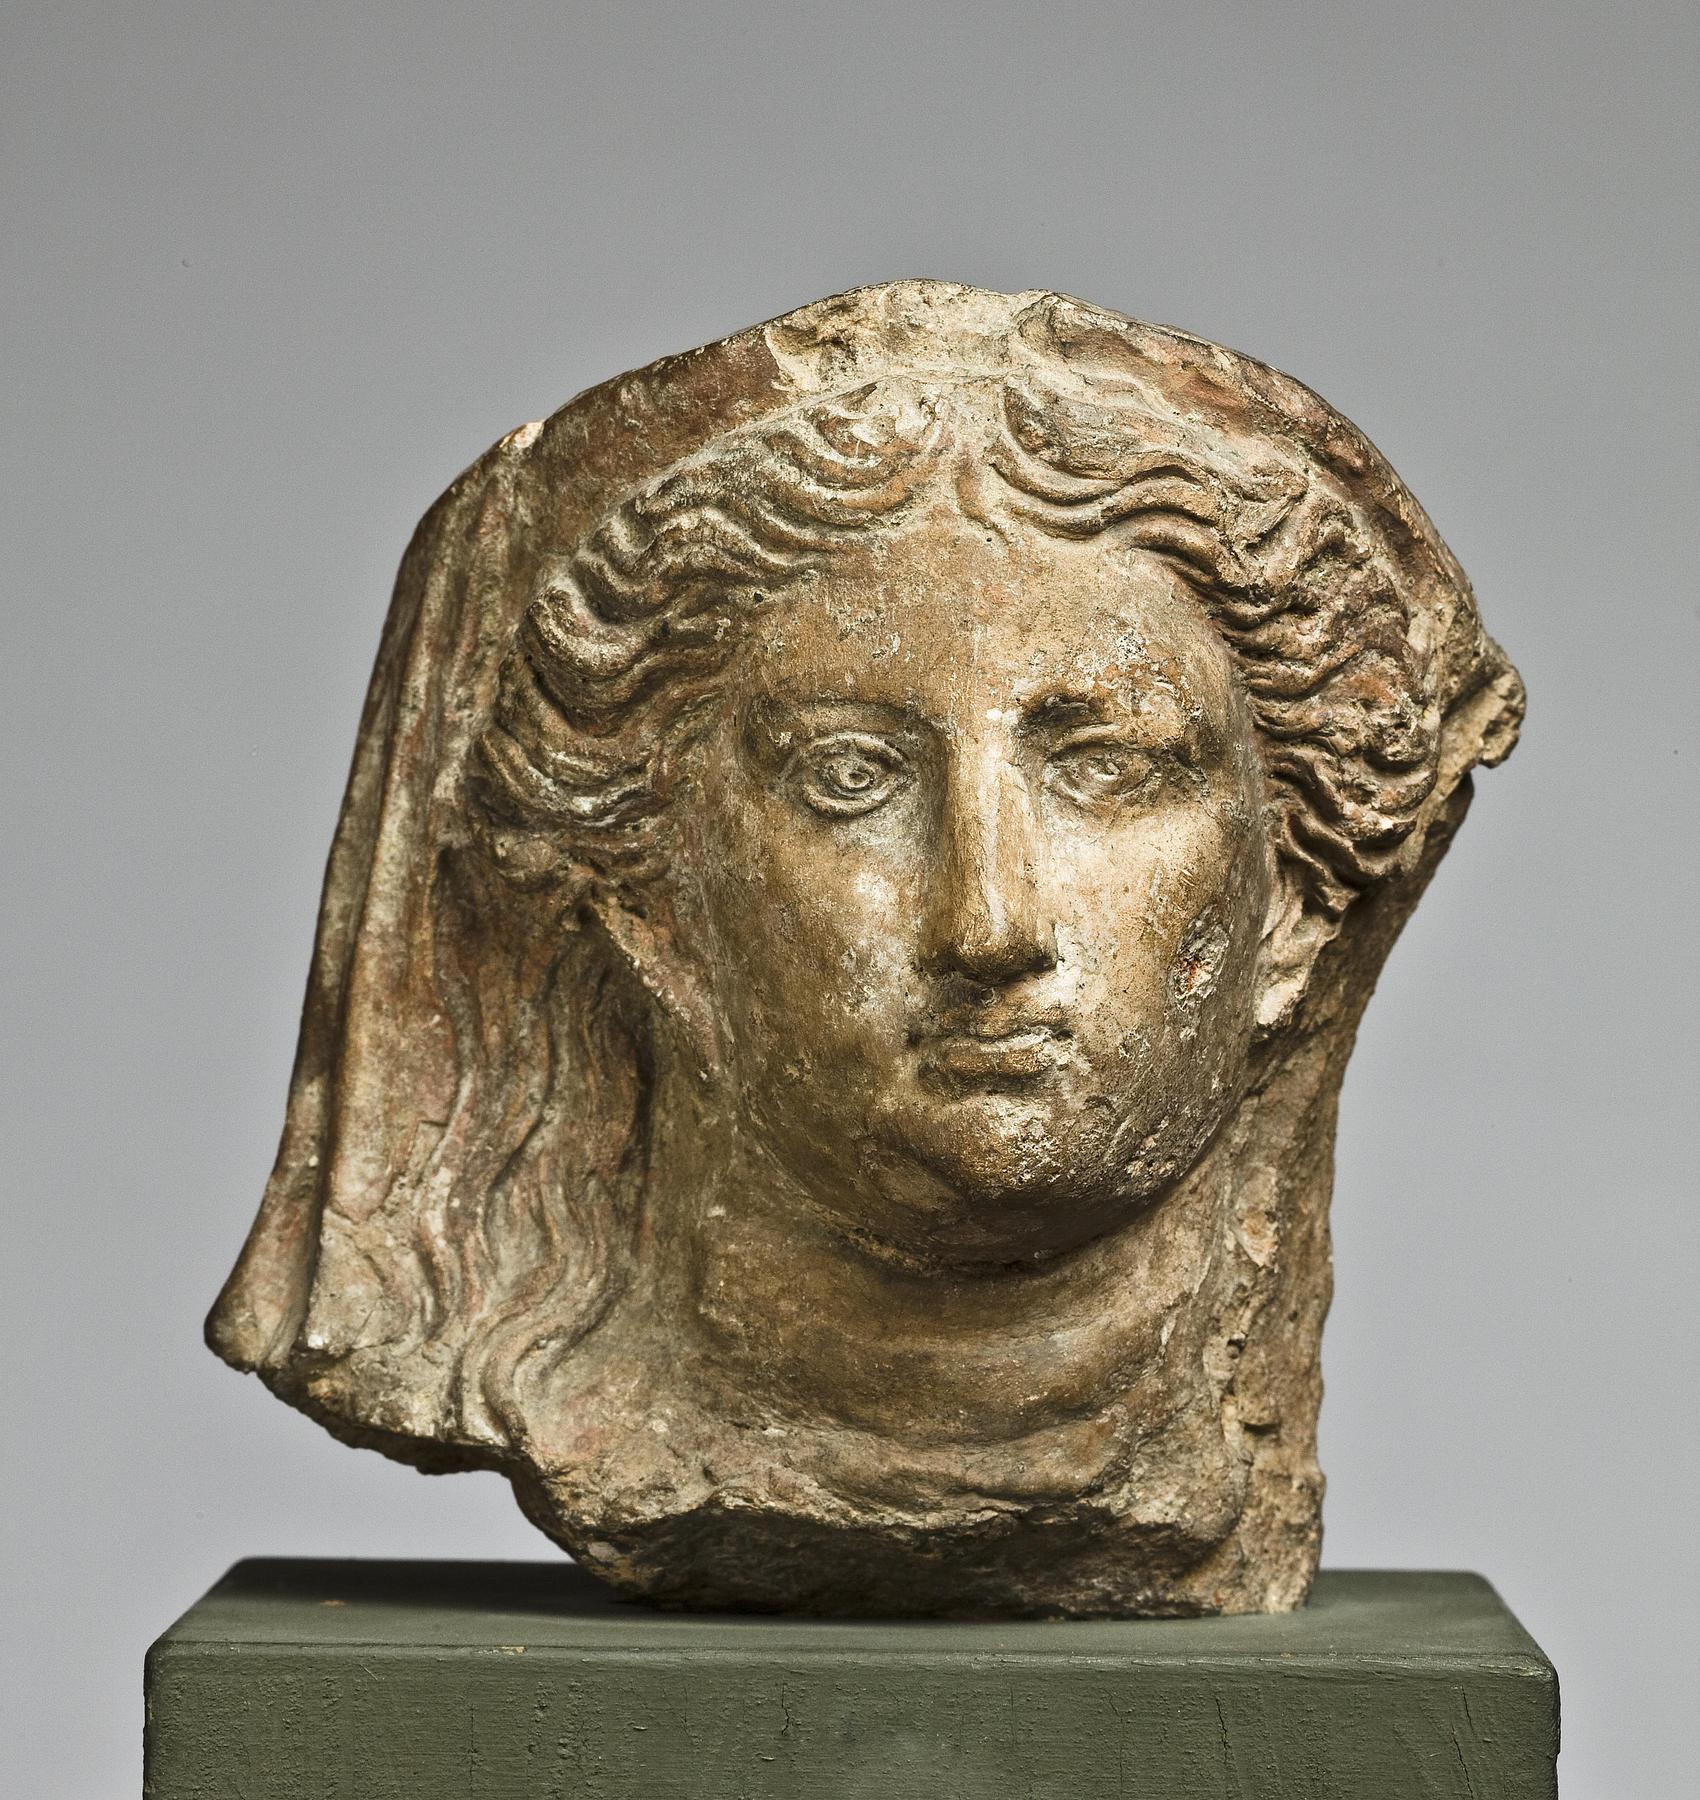 Antefix in the shape of a female head, H1062